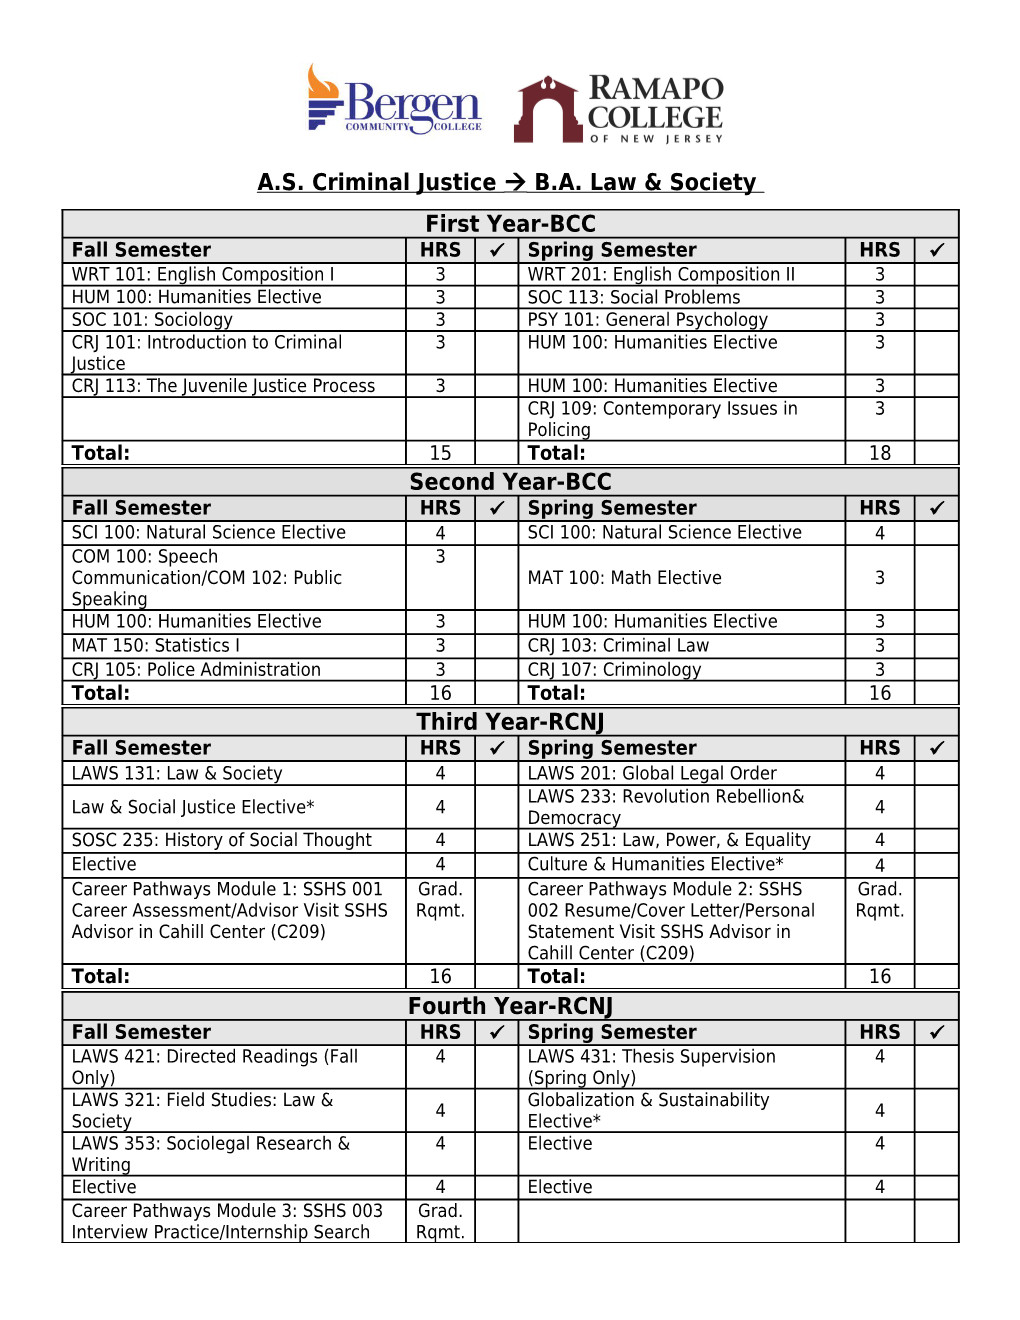 A.S. Criminal Justice B.A. Law & Society